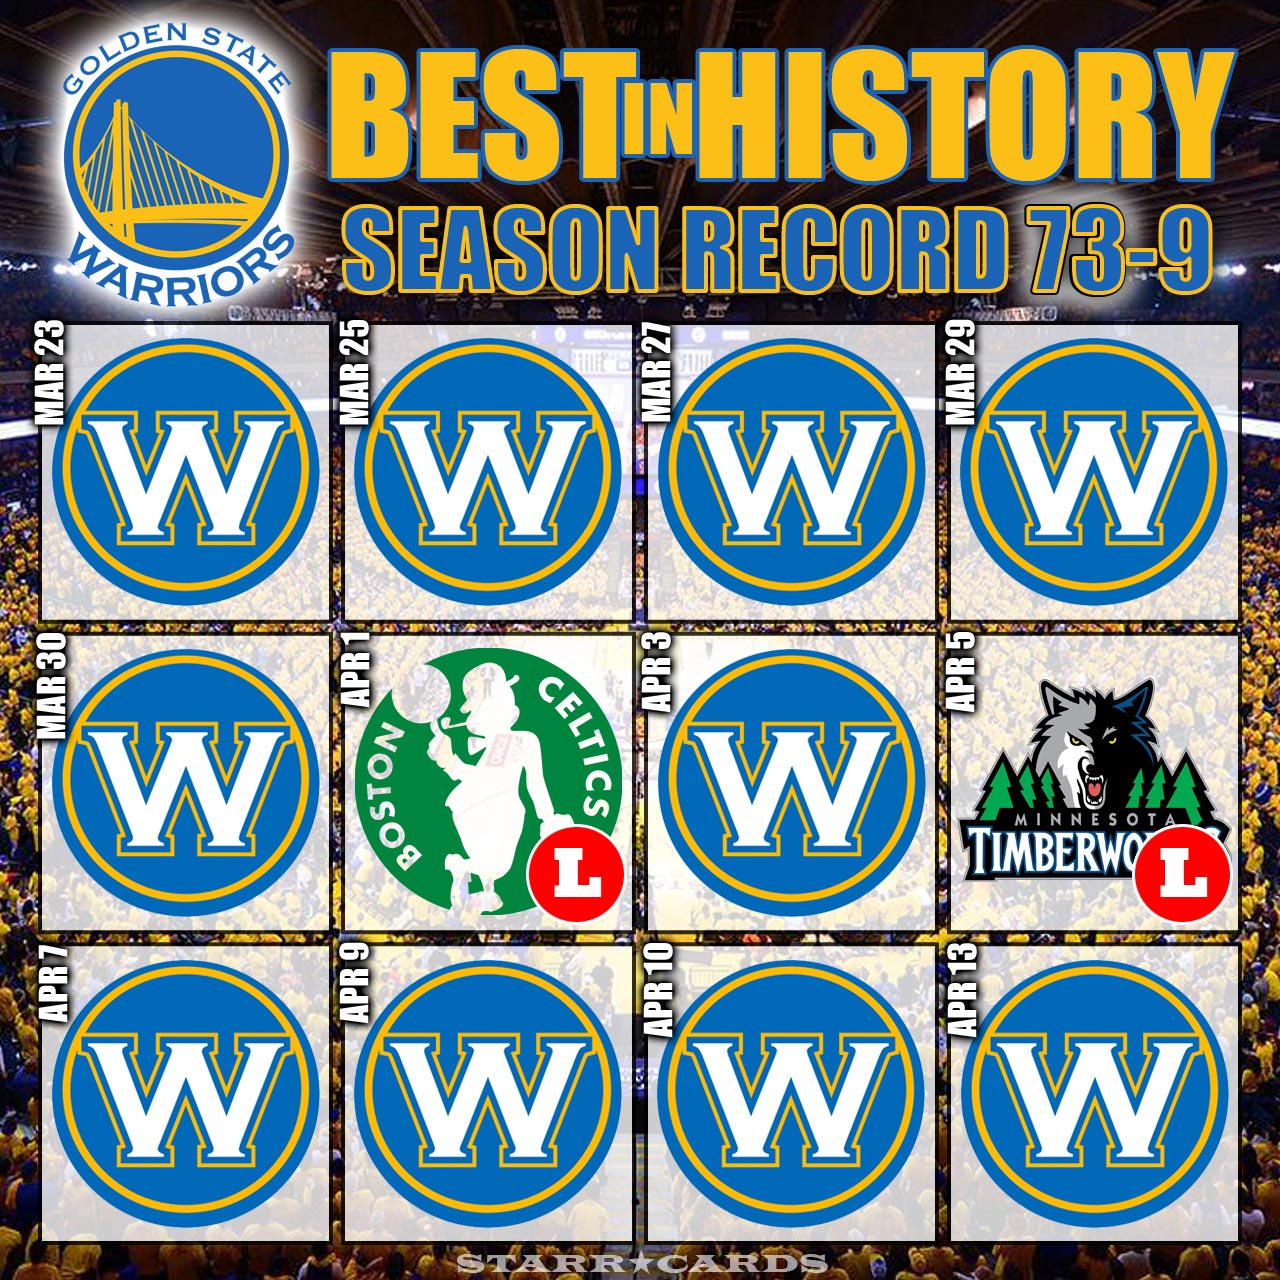 Warriors set NBA record with 73 wins in a season